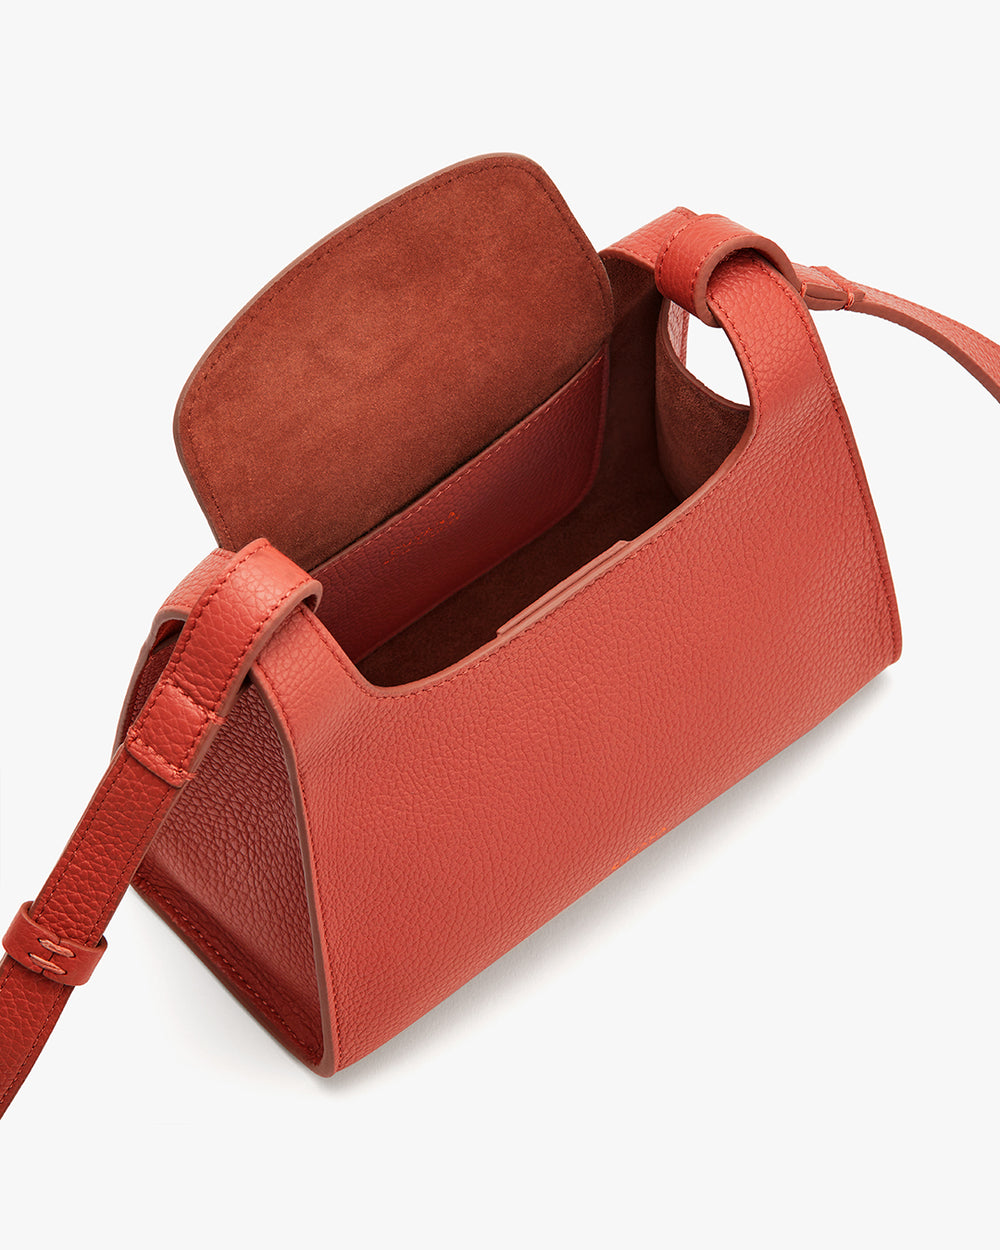 Open handbag with visible interior and adjustable strap.